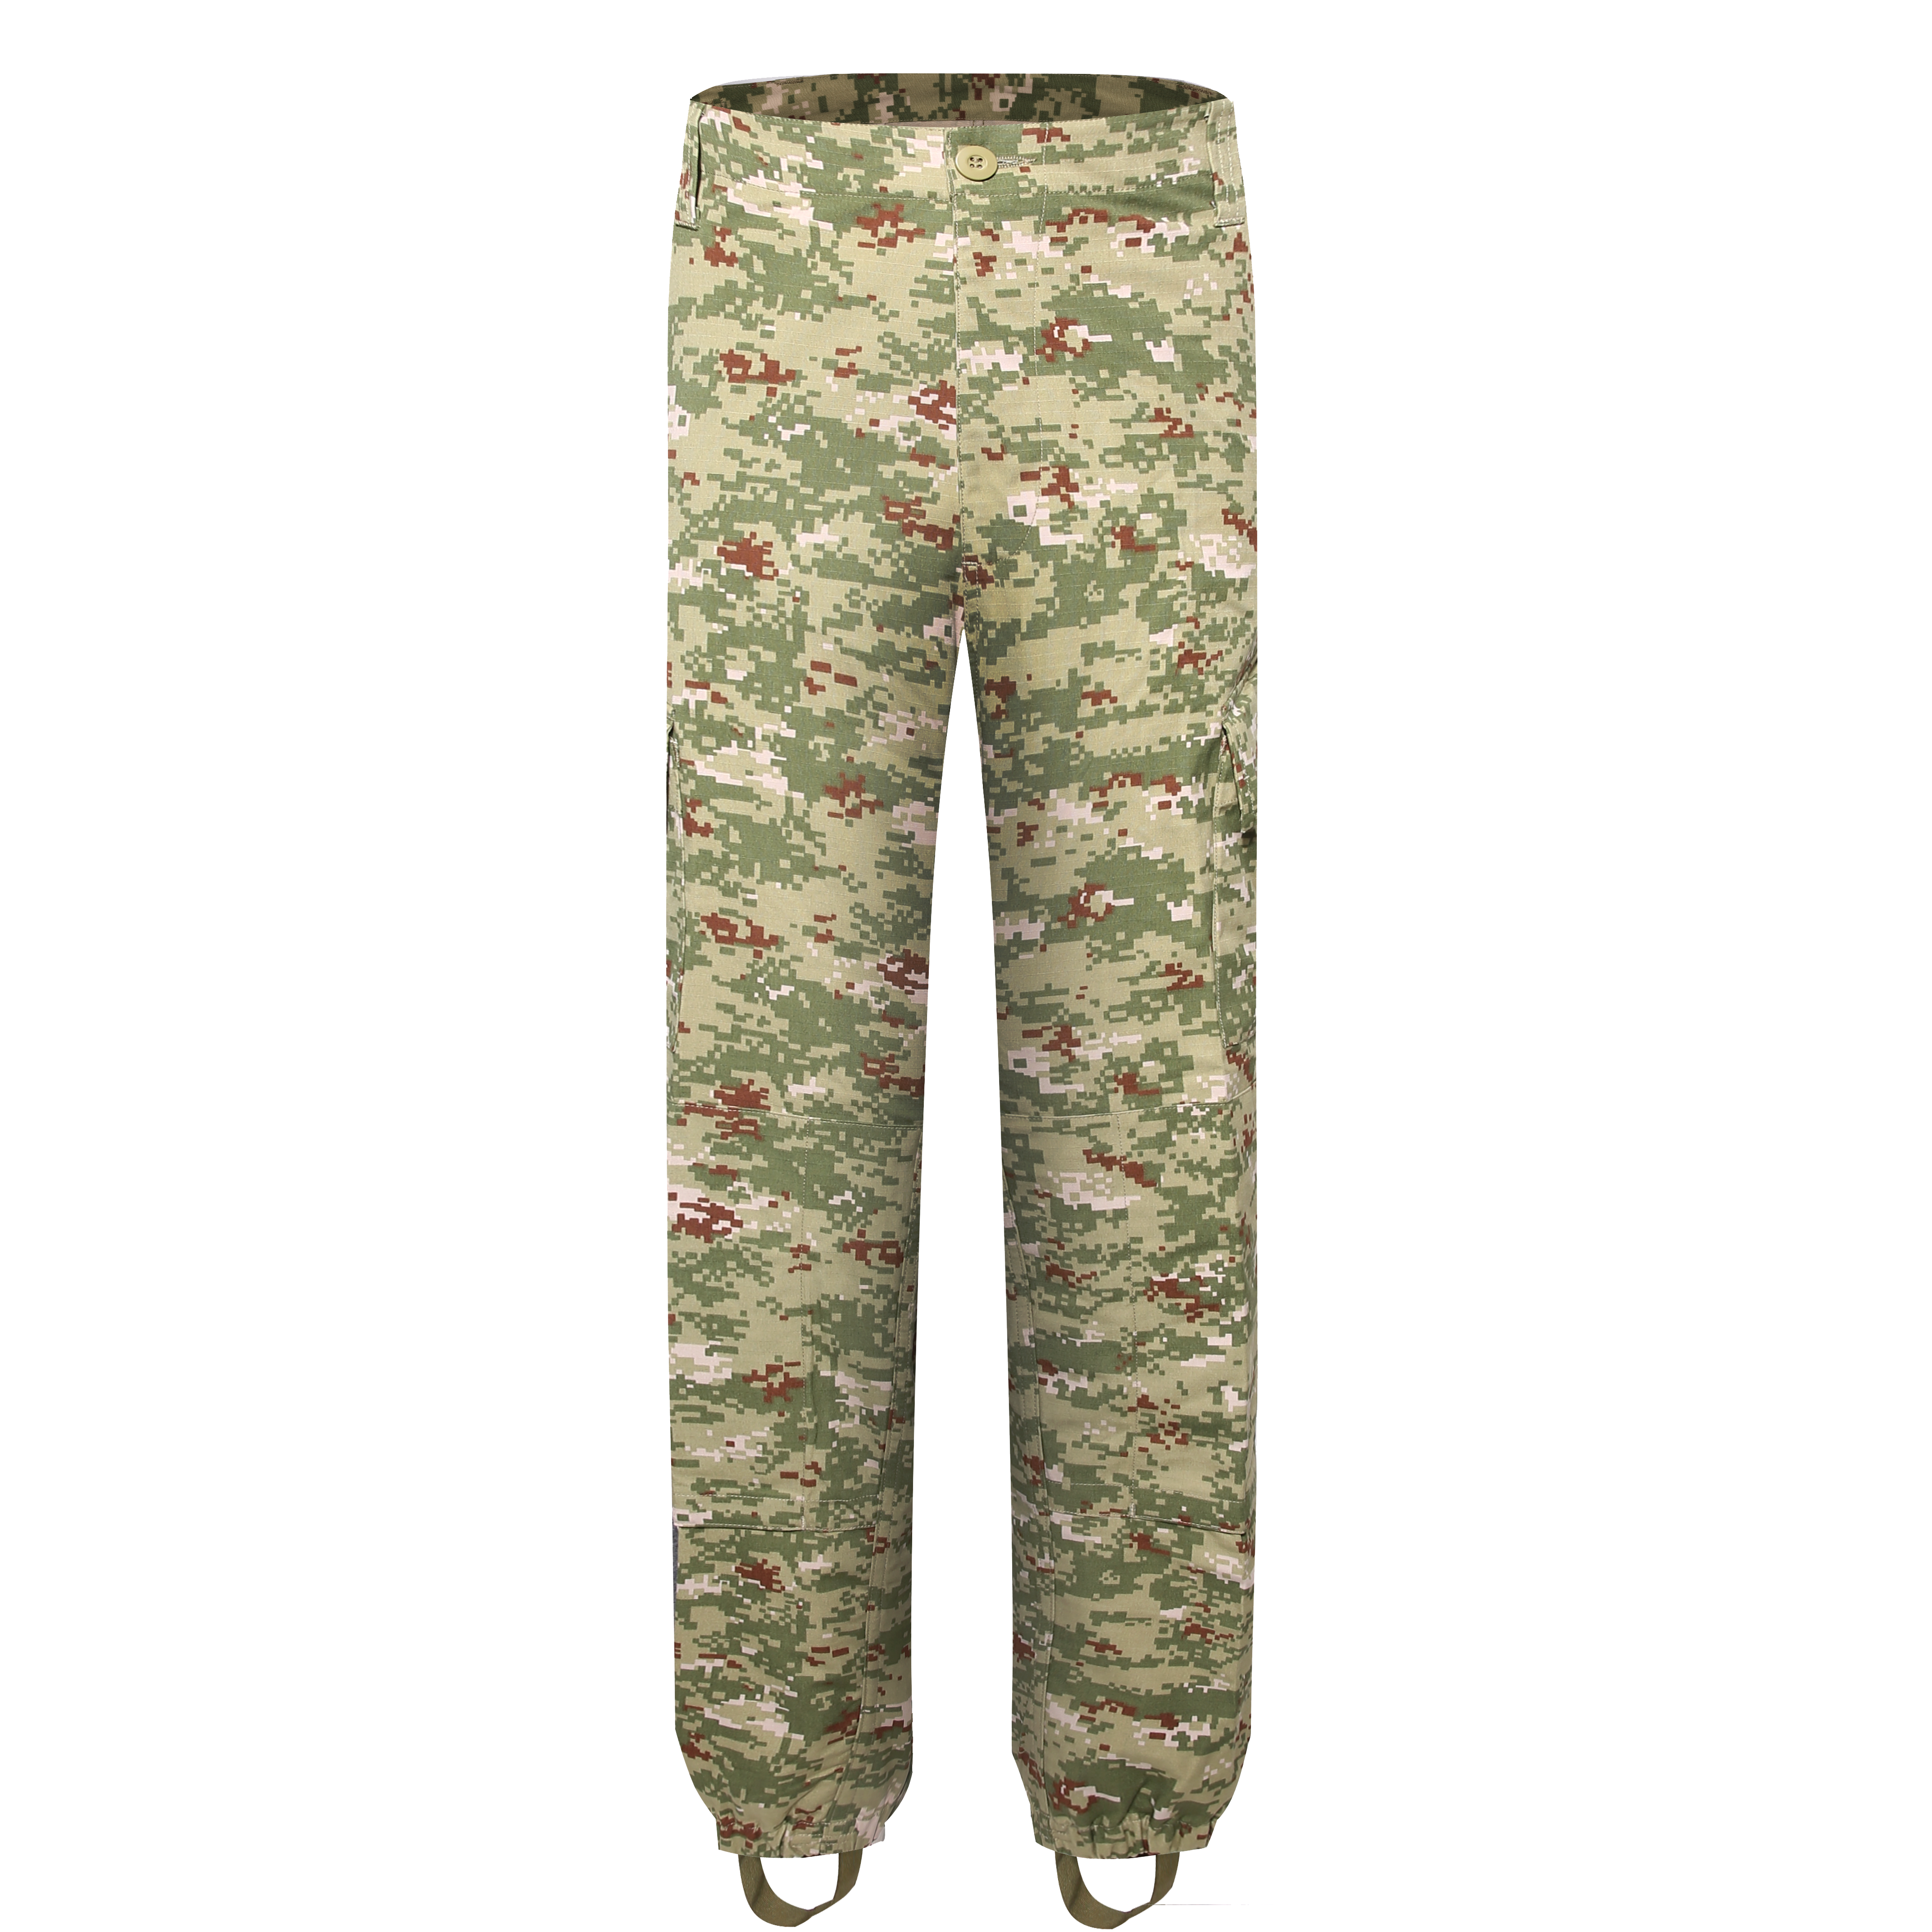 Camouflage Green pants Military Uniform